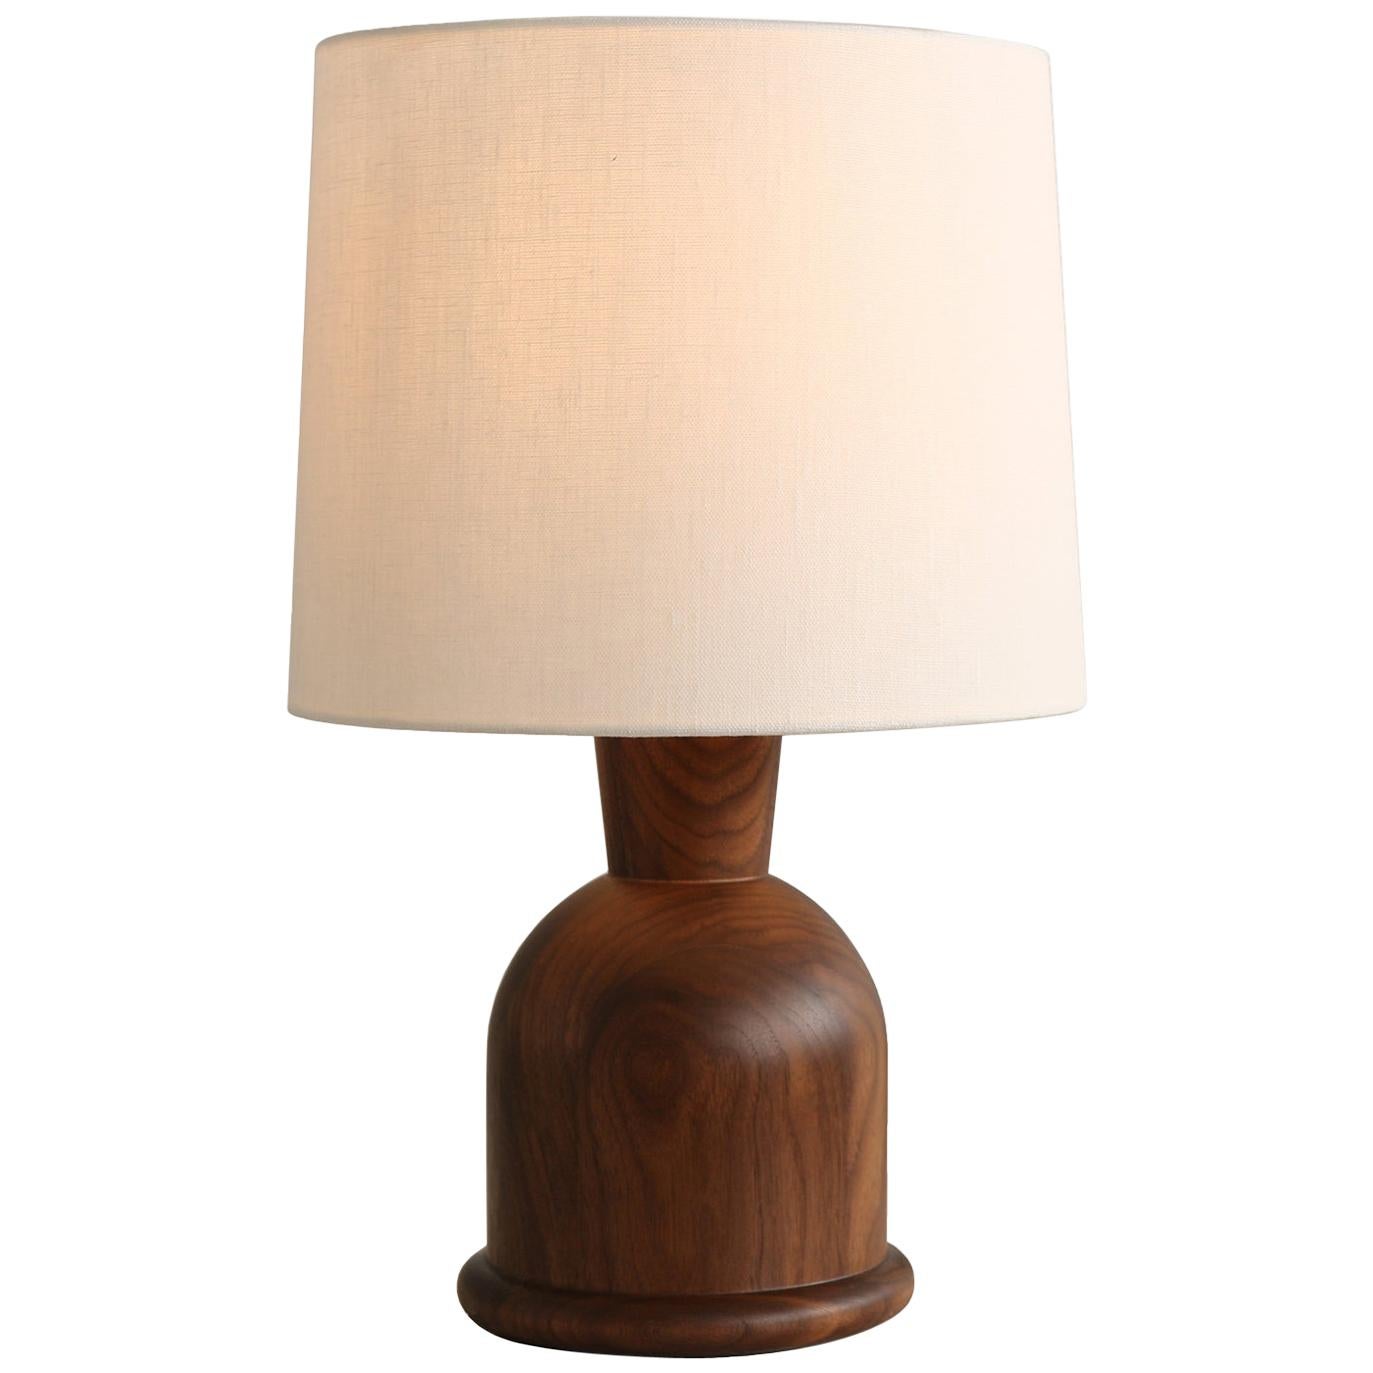 Beacon Small Table Lamp with Walnut Body and Linen Shade by Studio Dunn